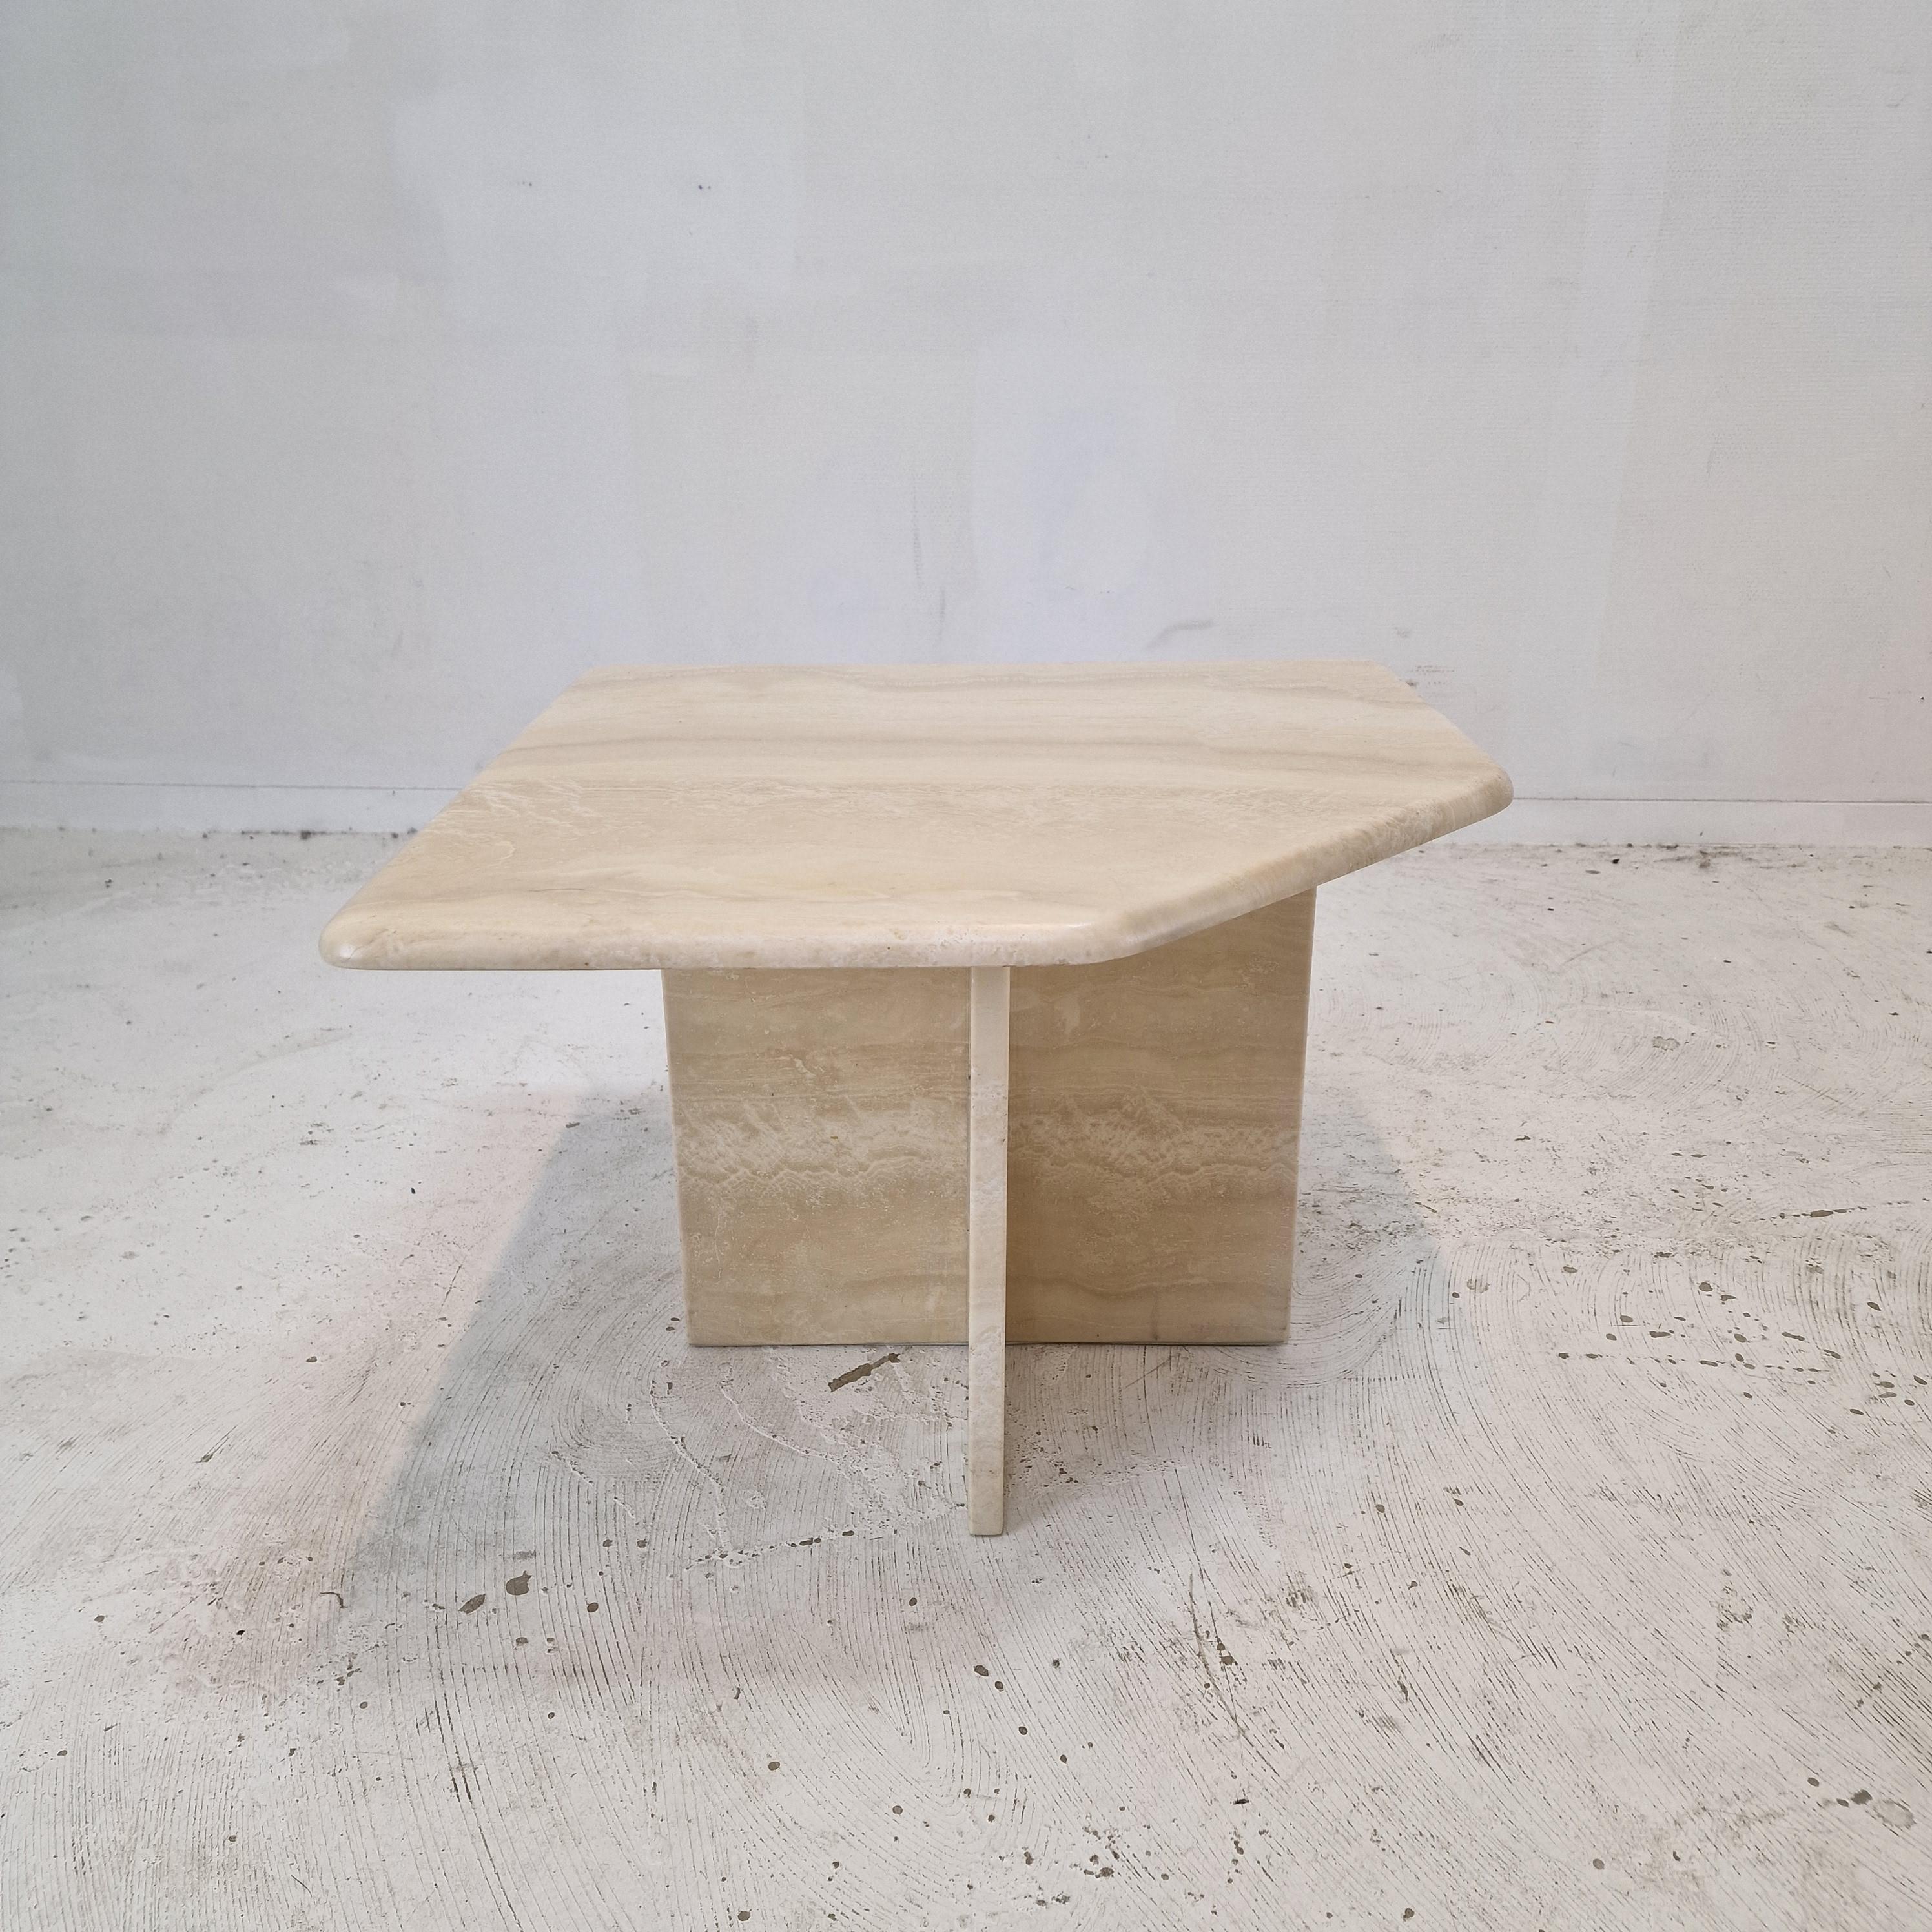 Set of 4 Italian Travertine Coffee or Side Tables, 1990s For Sale 6